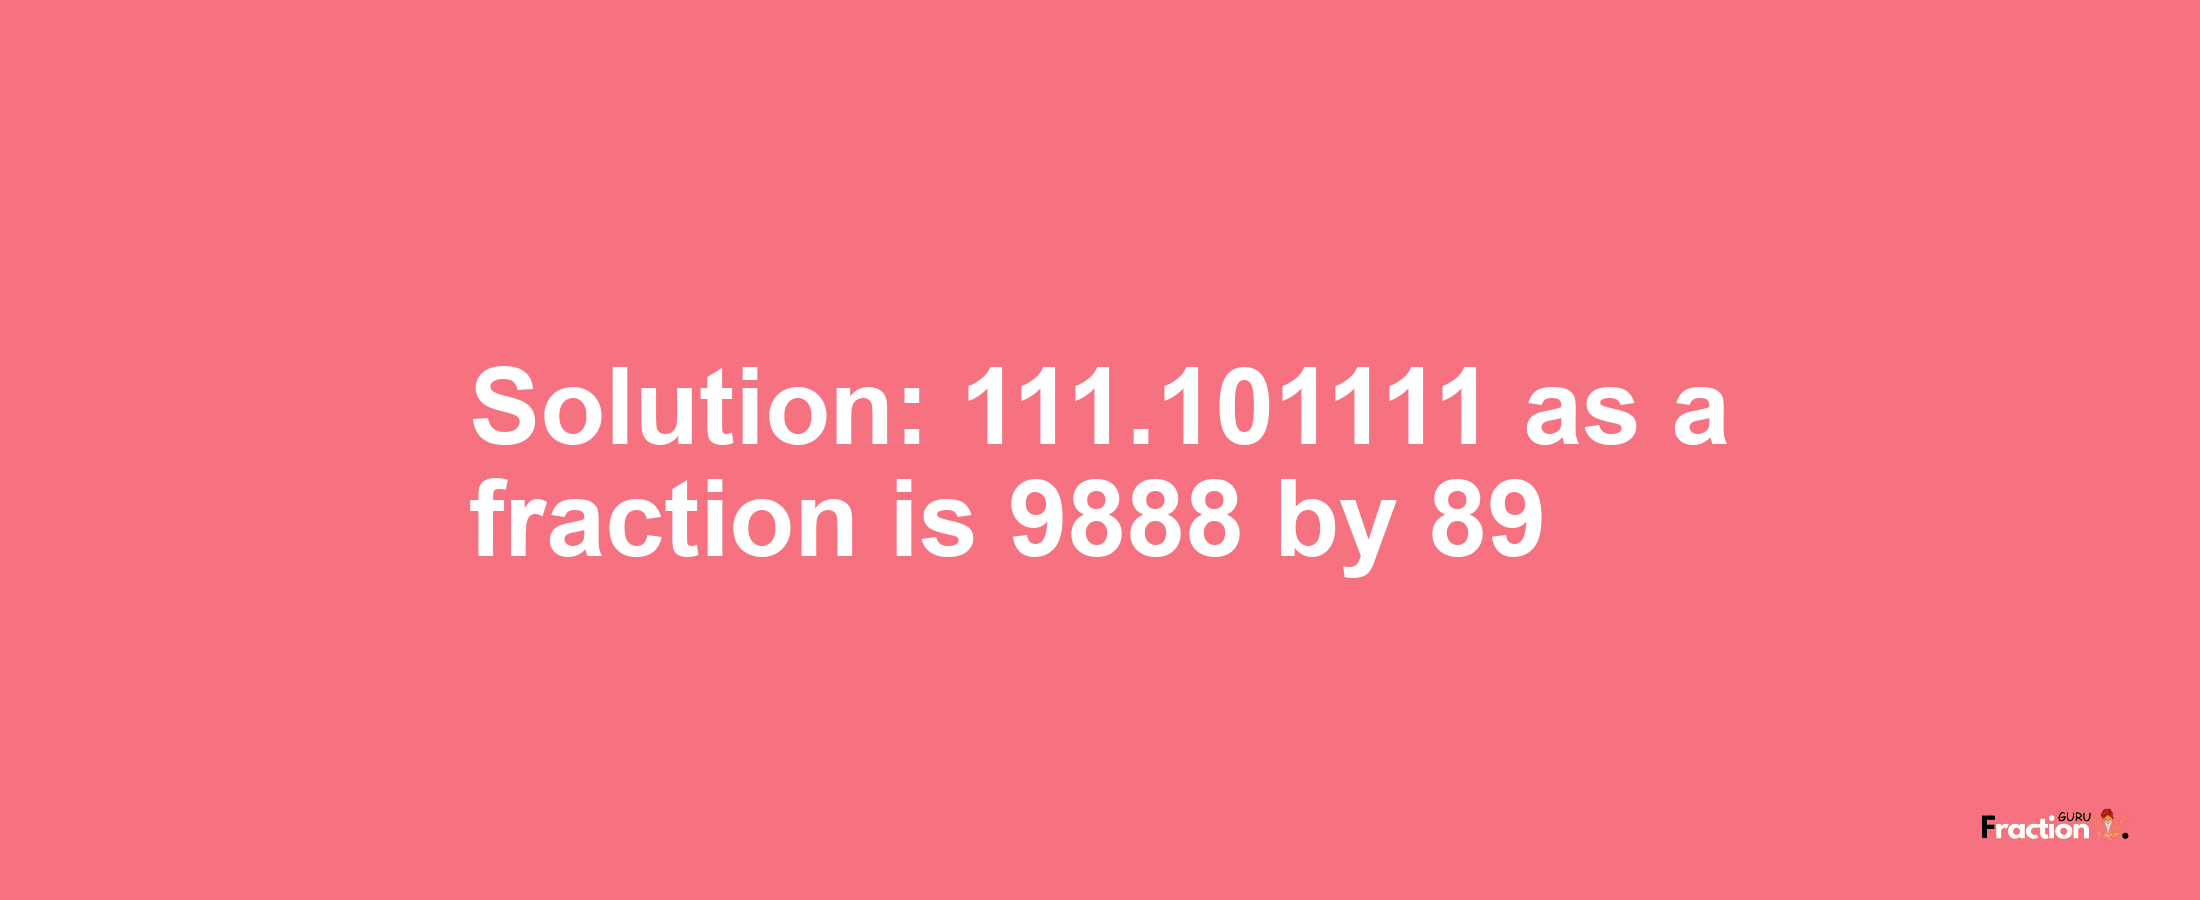 Solution:111.101111 as a fraction is 9888/89